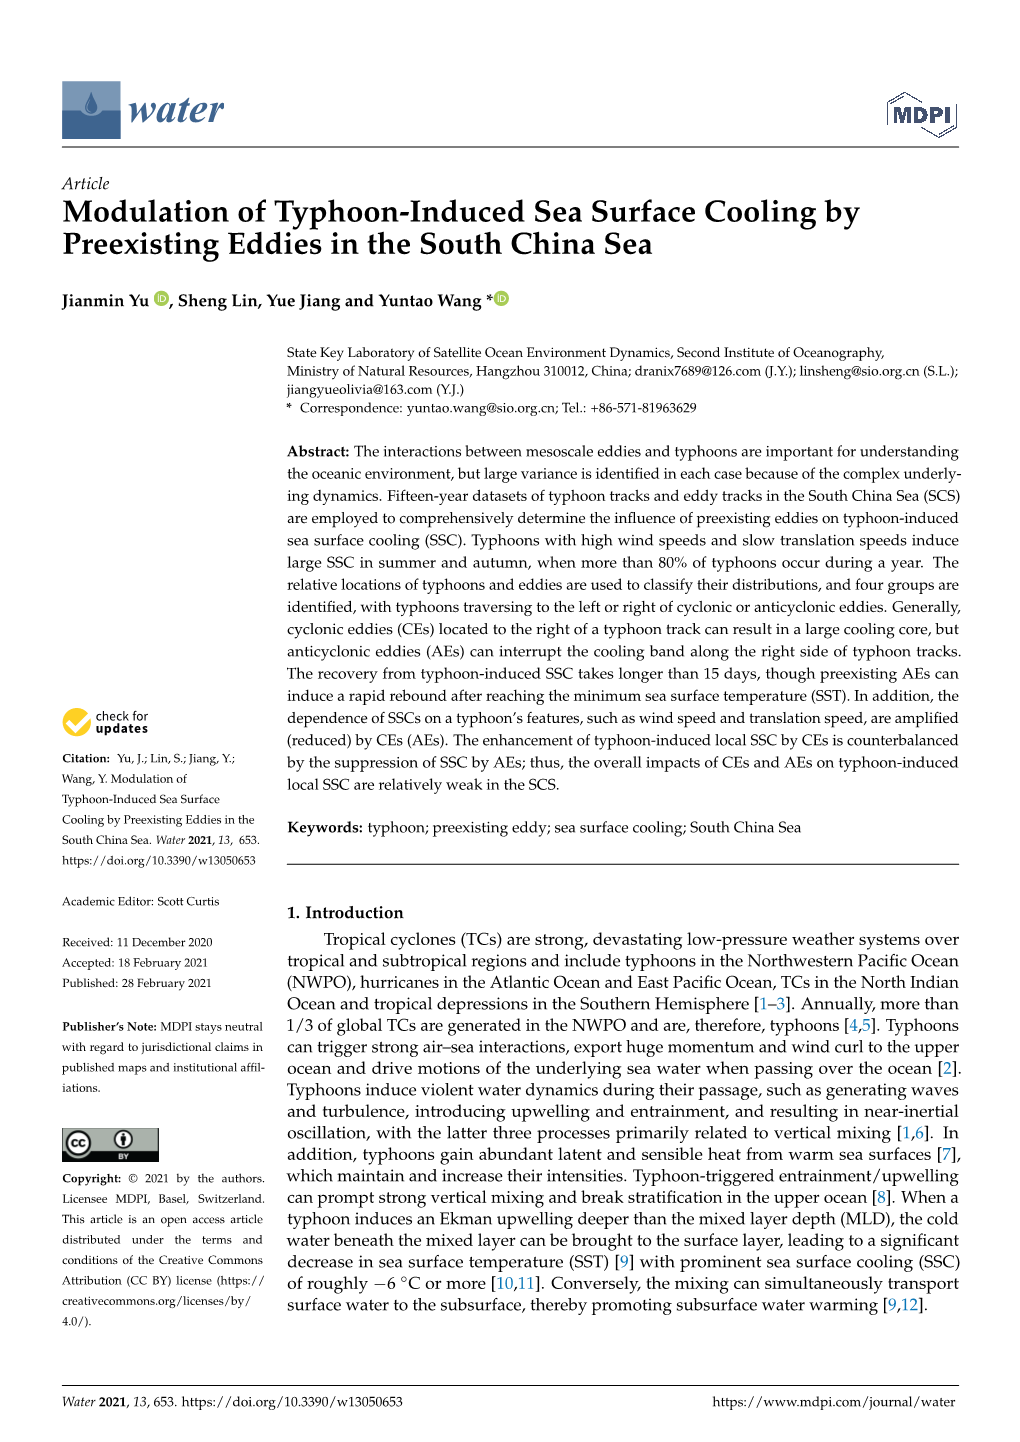 Modulation of Typhoon-Induced Sea Surface Cooling by Preexisting Eddies in the South China Sea